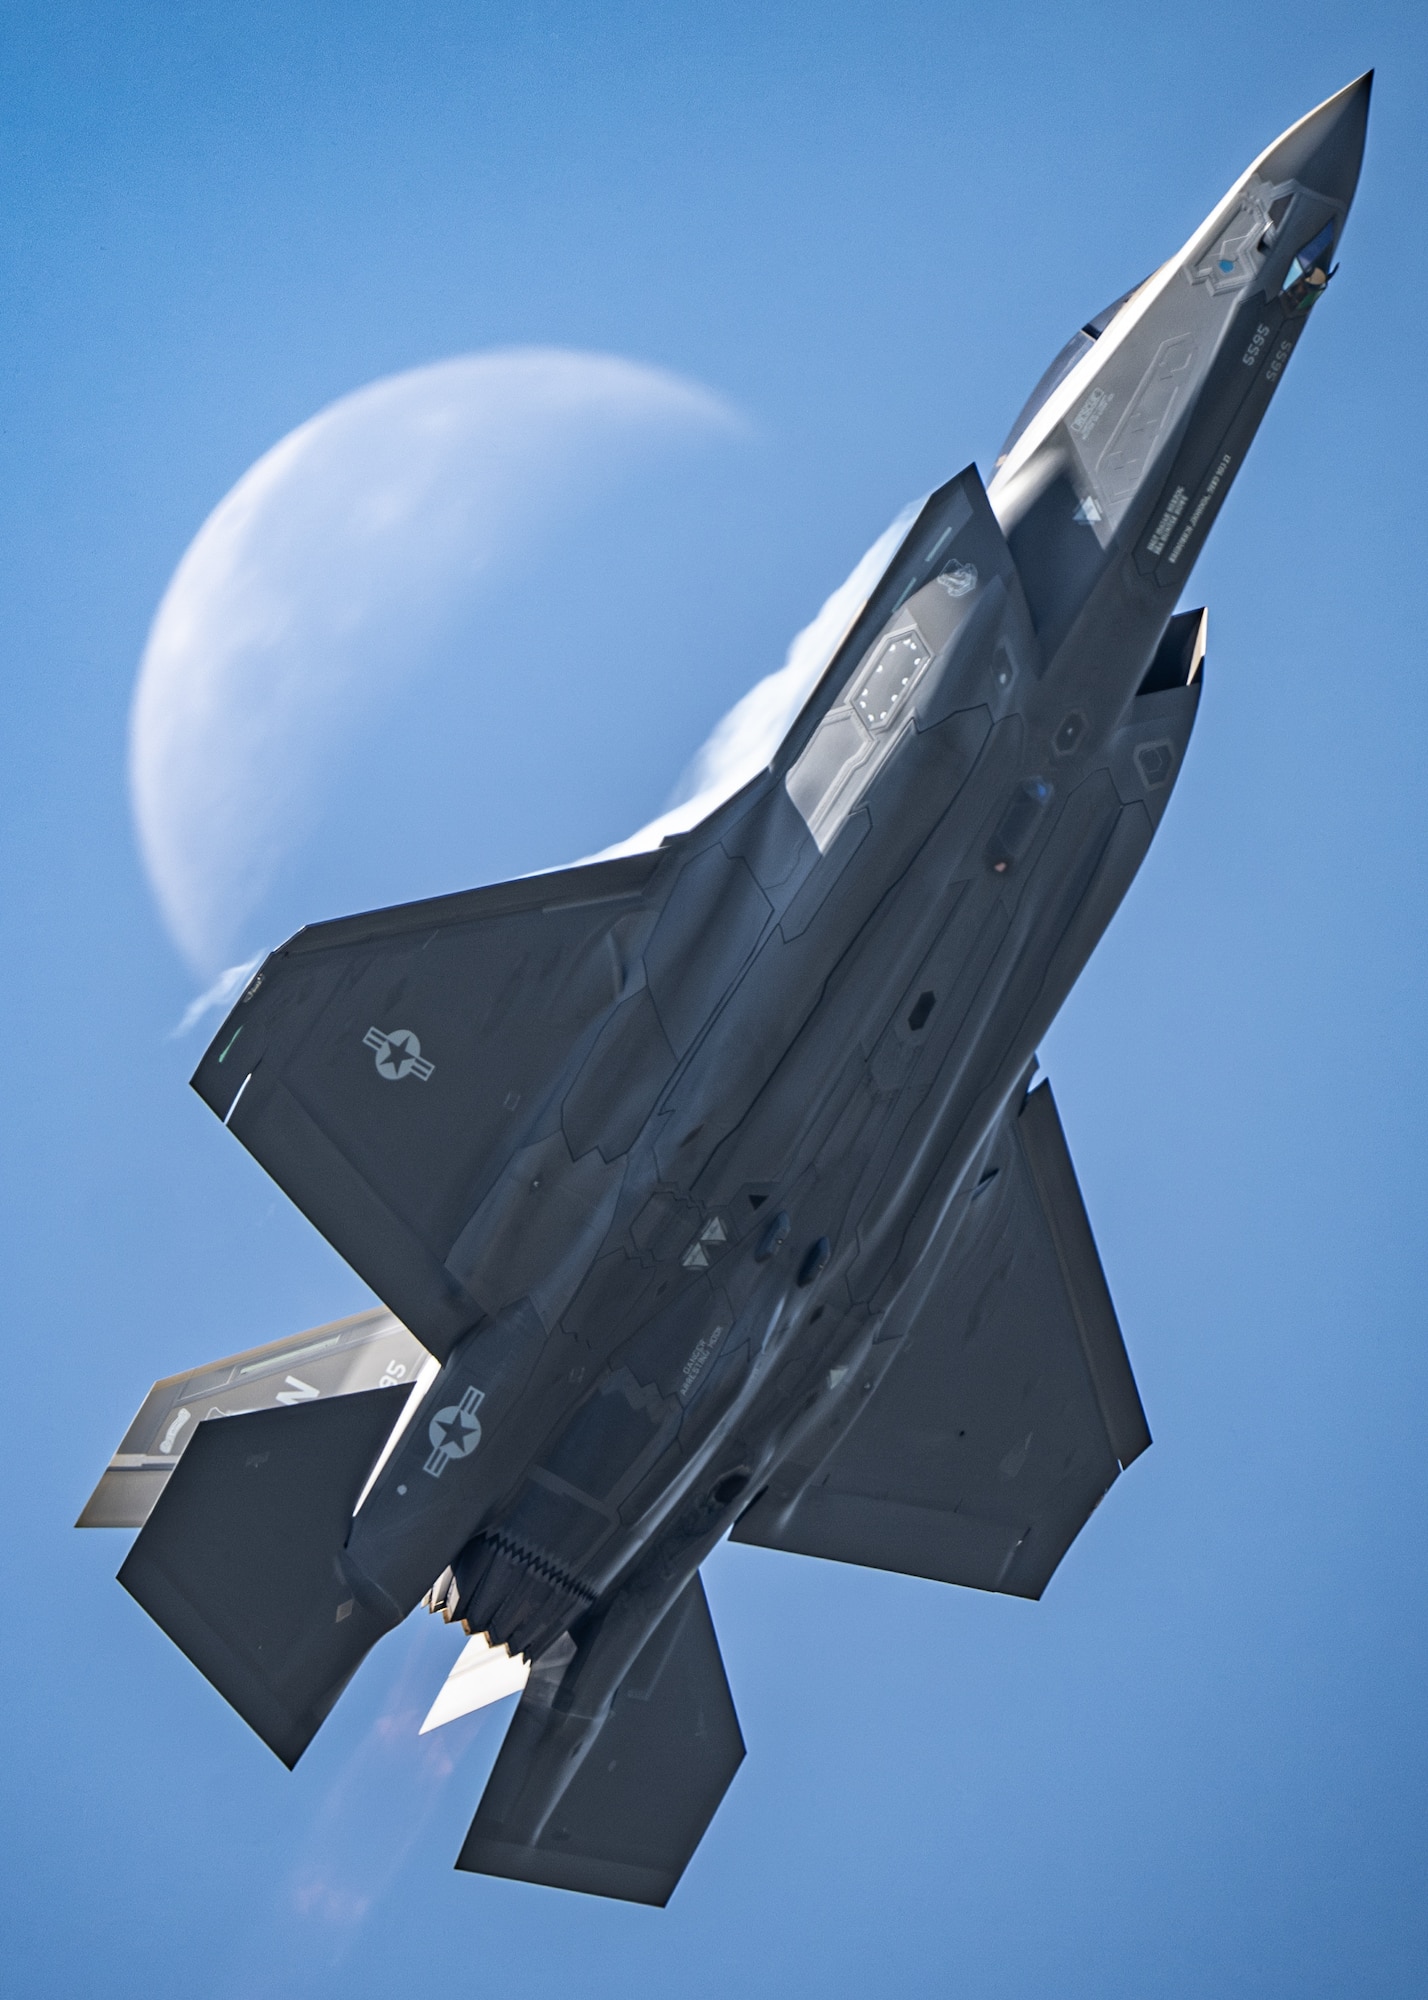 An F-35 flying in front of a crescent moon